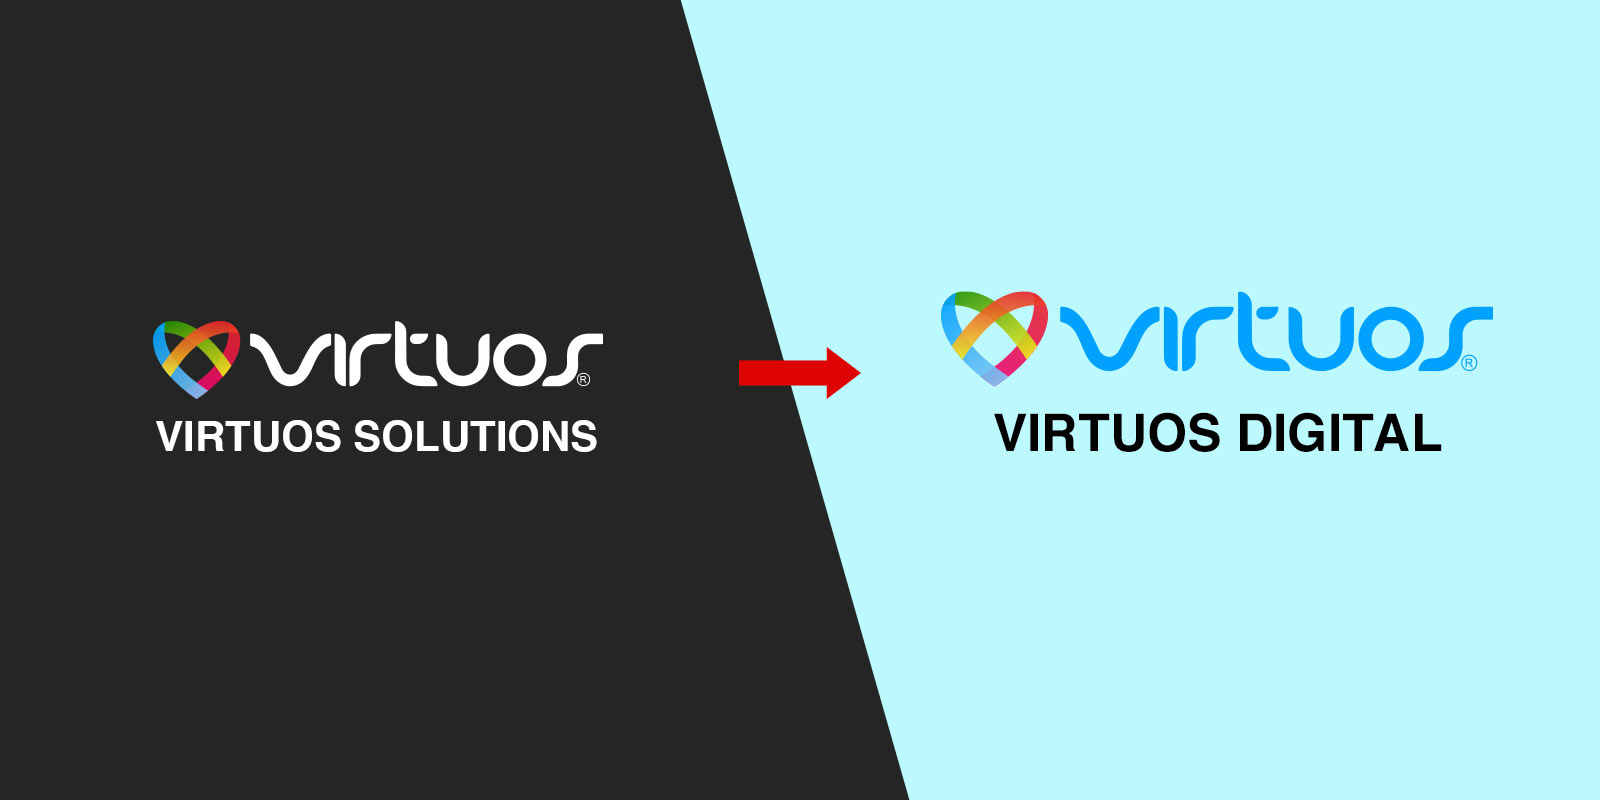 Virtuos Solutions changes its name to Virtuos Digital